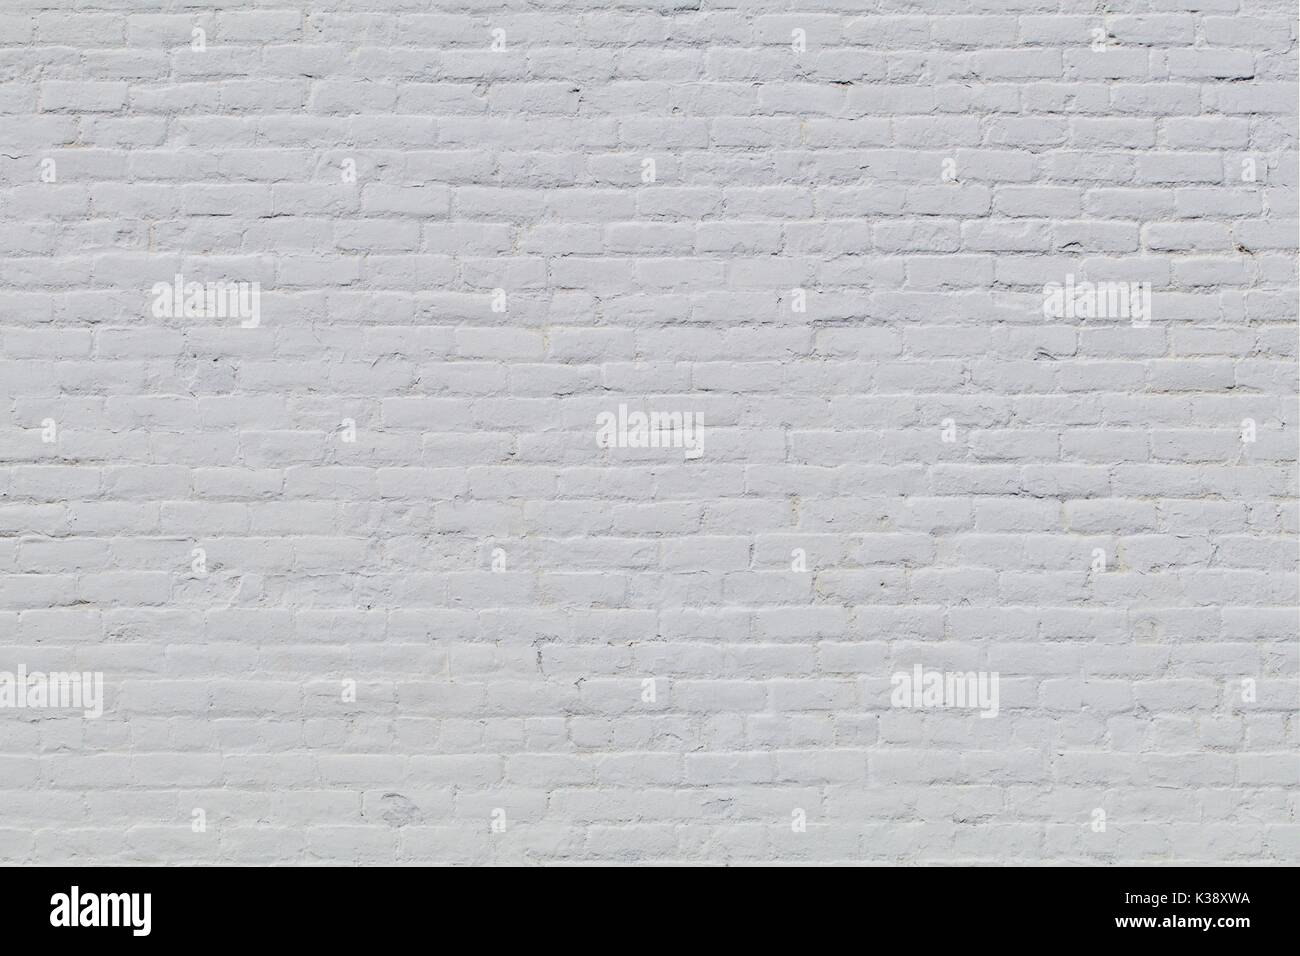 Solid old brick wall with white paint Stock Photo